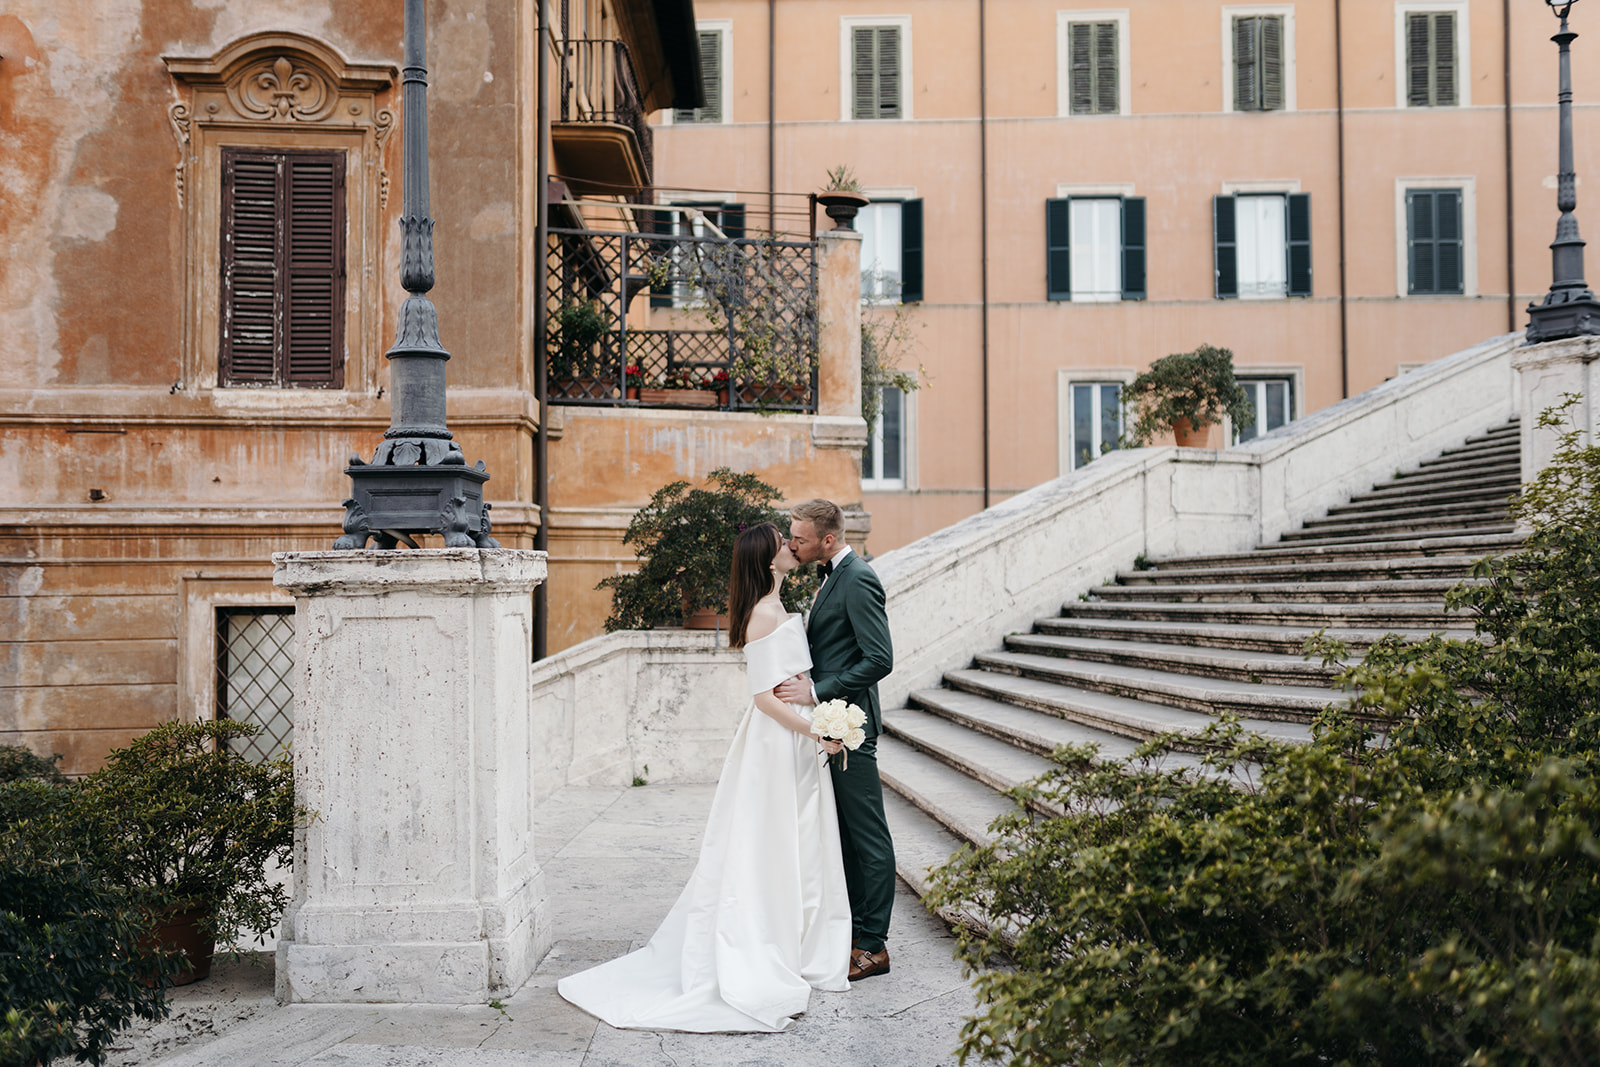 After wedding photoshoot in Rome. Wedding couple standing on the Spanish steps photographed by Clara Buchberger